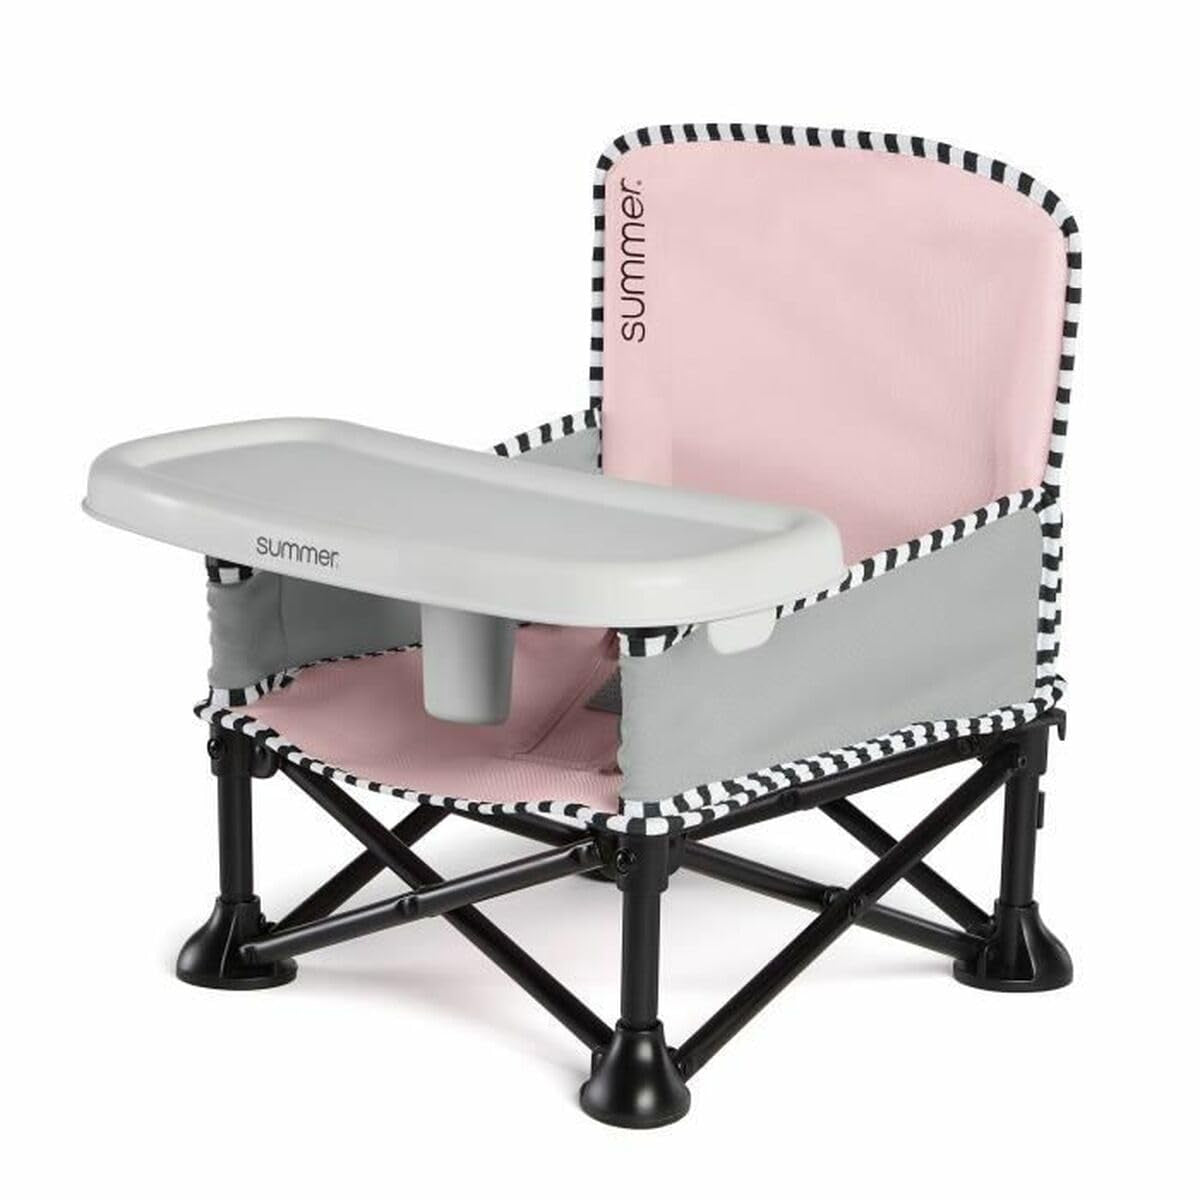 Summer by  Pop 'N Sit Portable Booster Chair, Floor Seat, Indoor/Outdoor Use, Compact Fold, Coral, 6 Mos - 3 Yrs